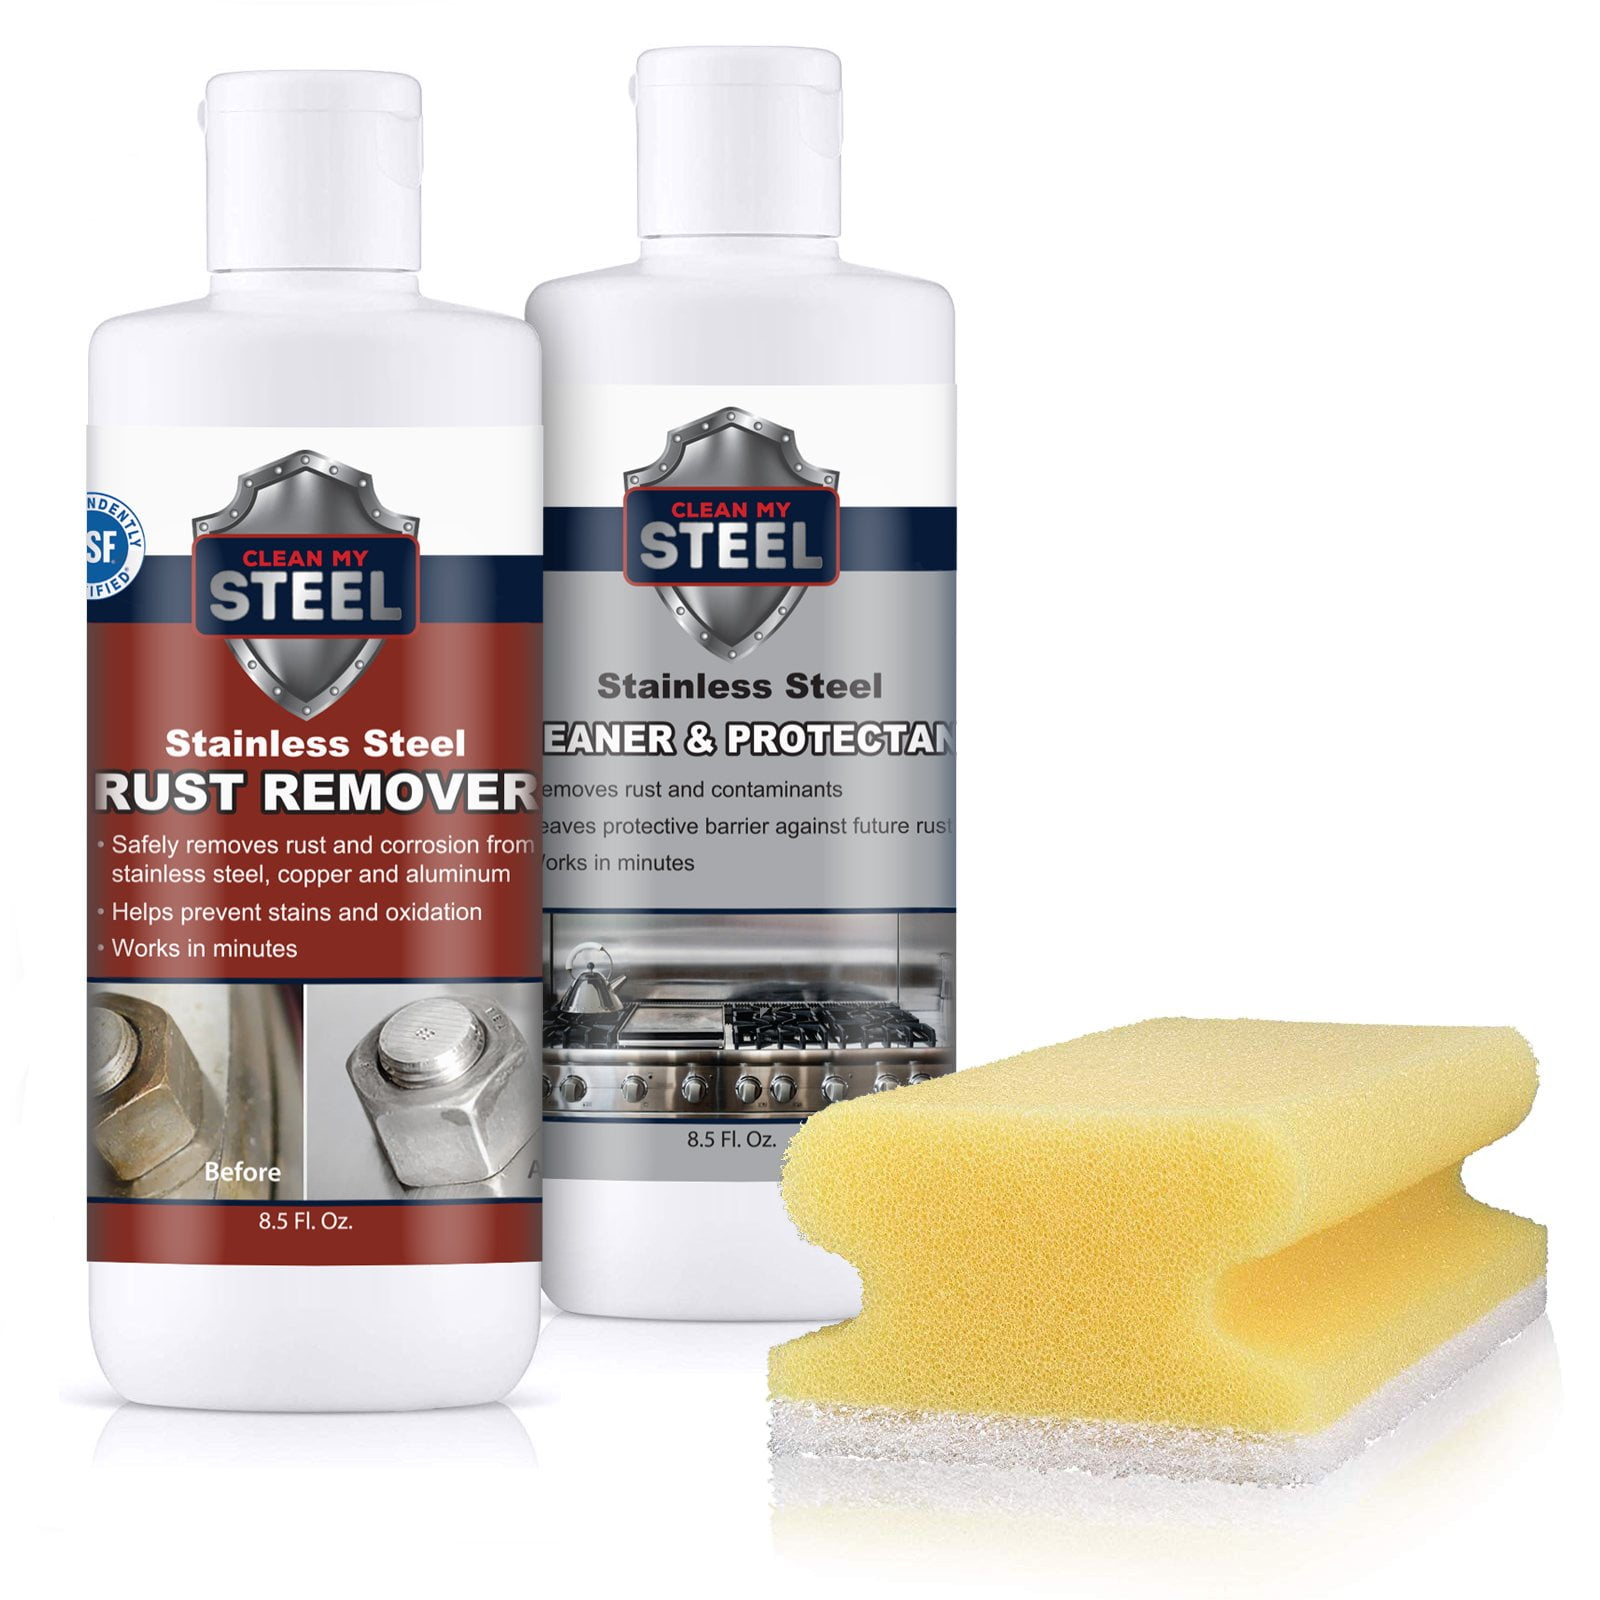  Weiman Stainless Steel Cleaner Kit - Removes